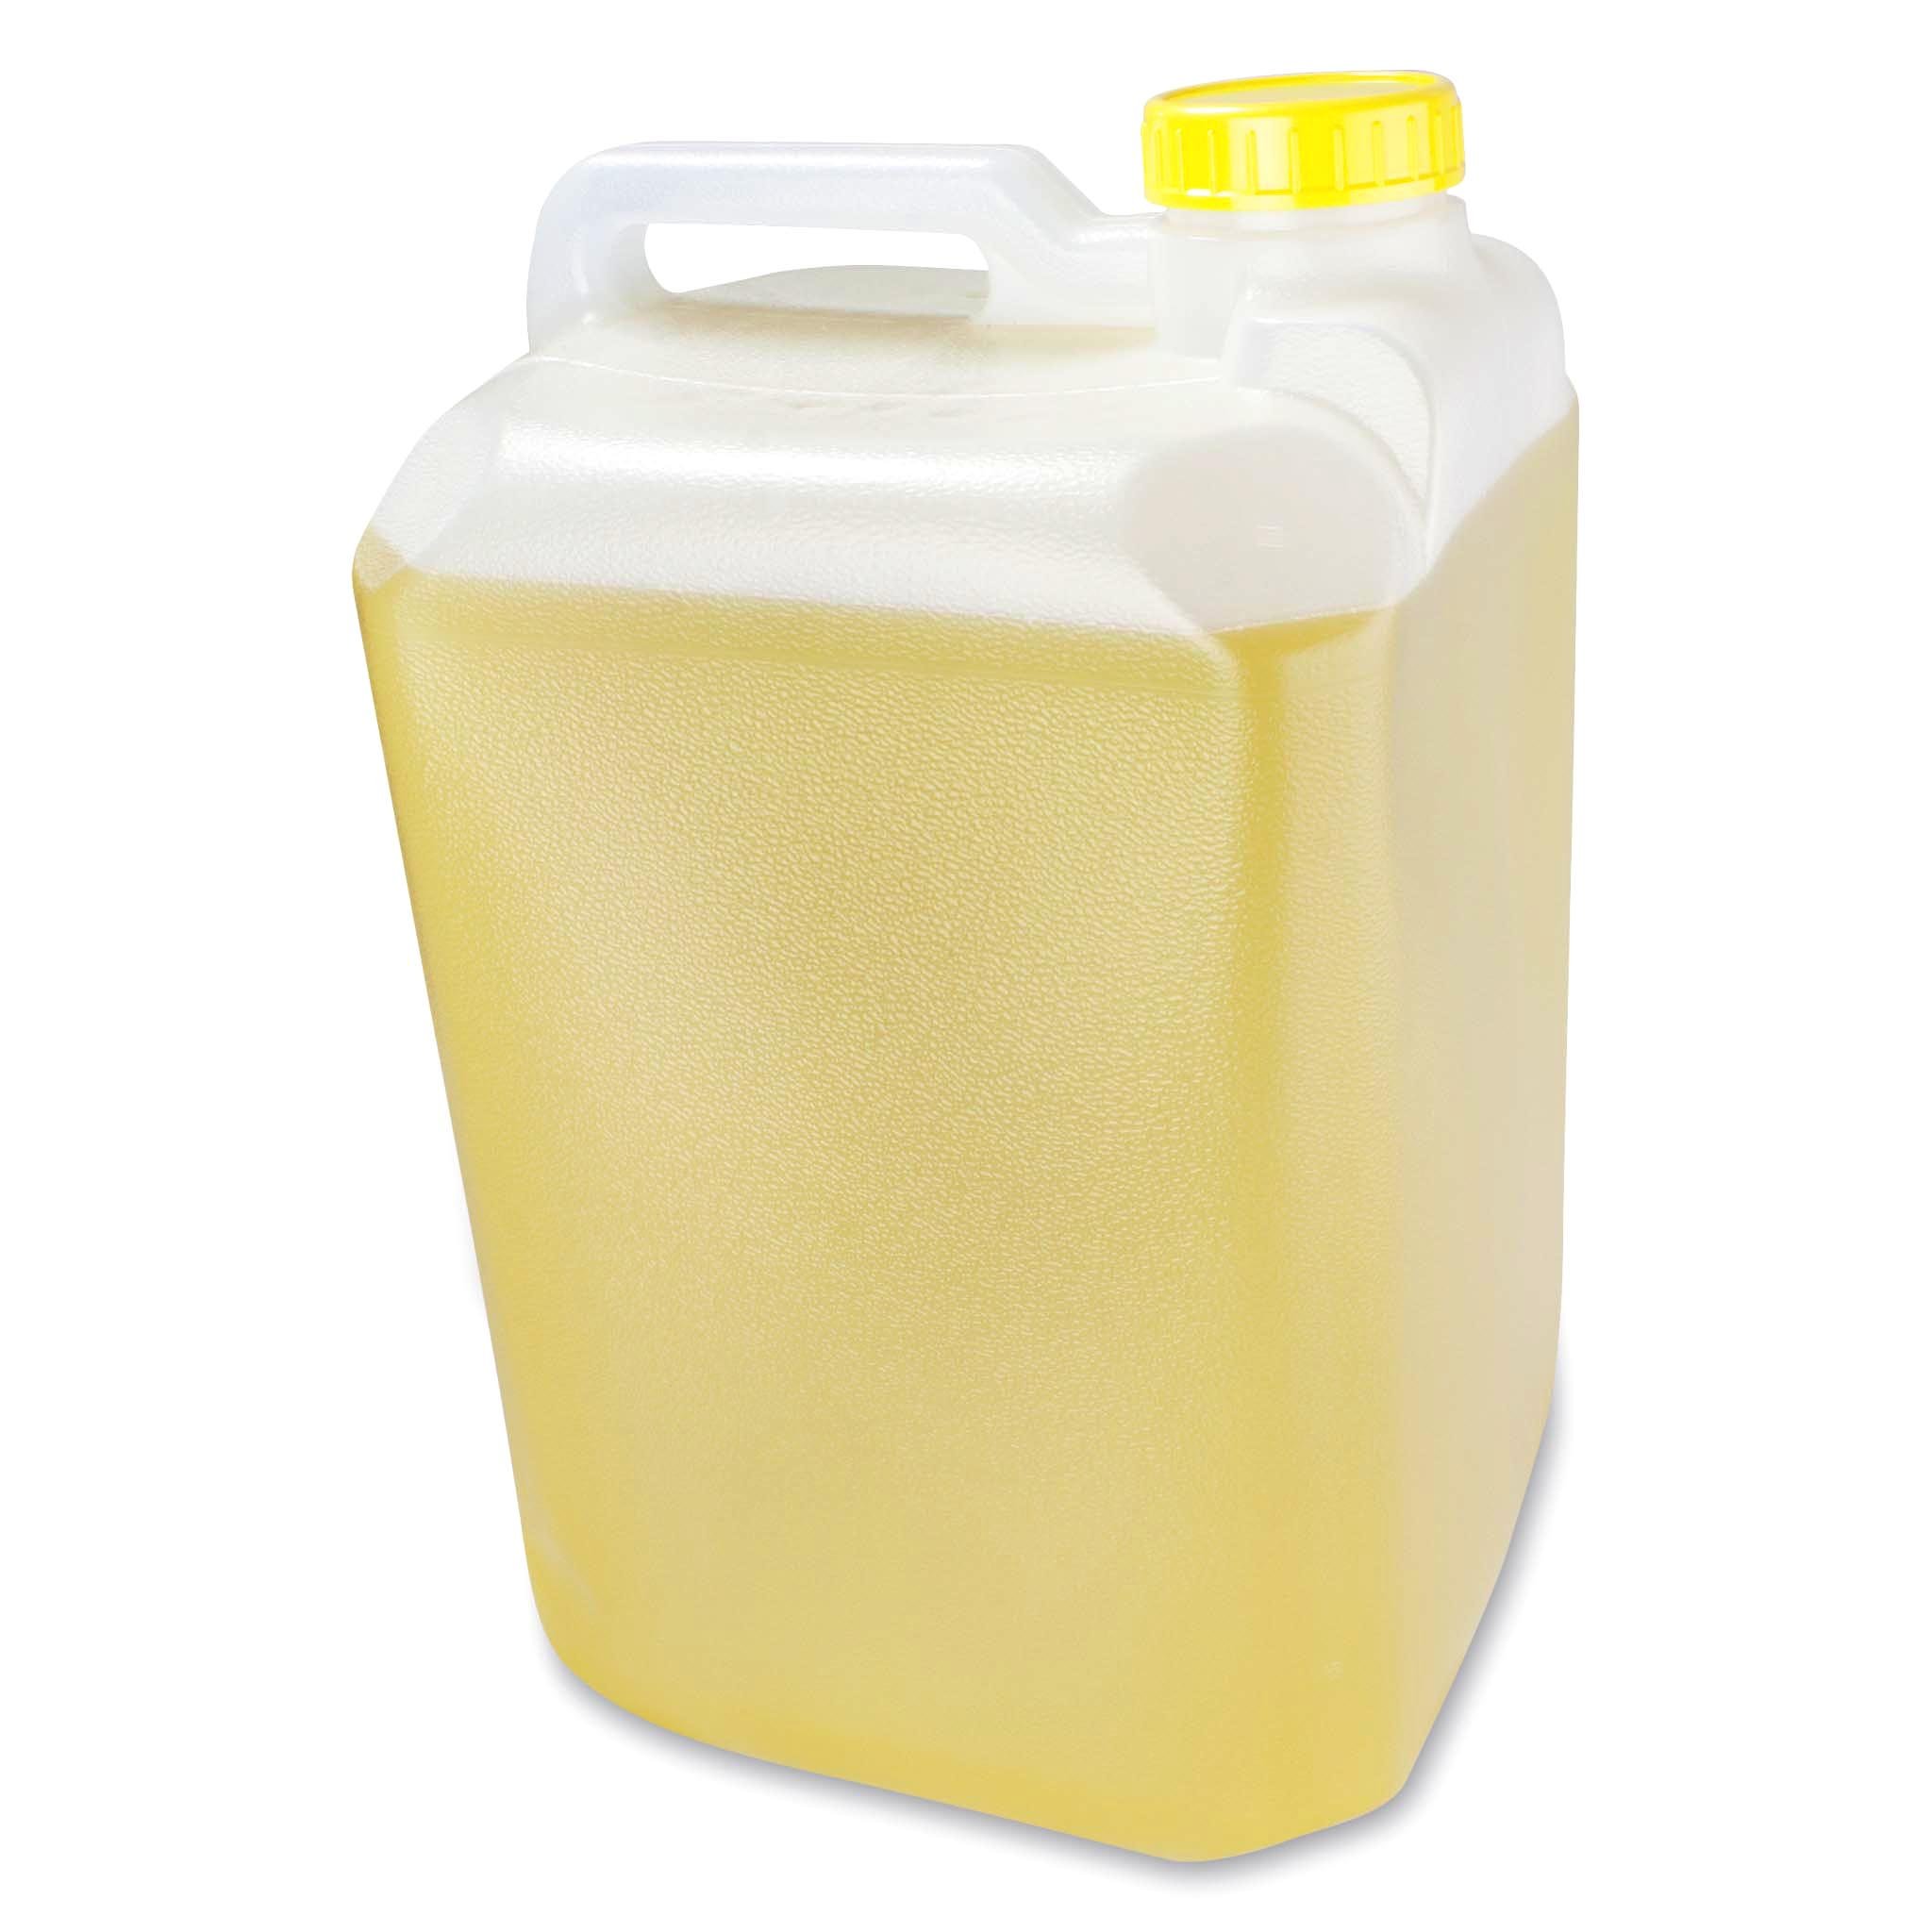 Refined cooking oil products